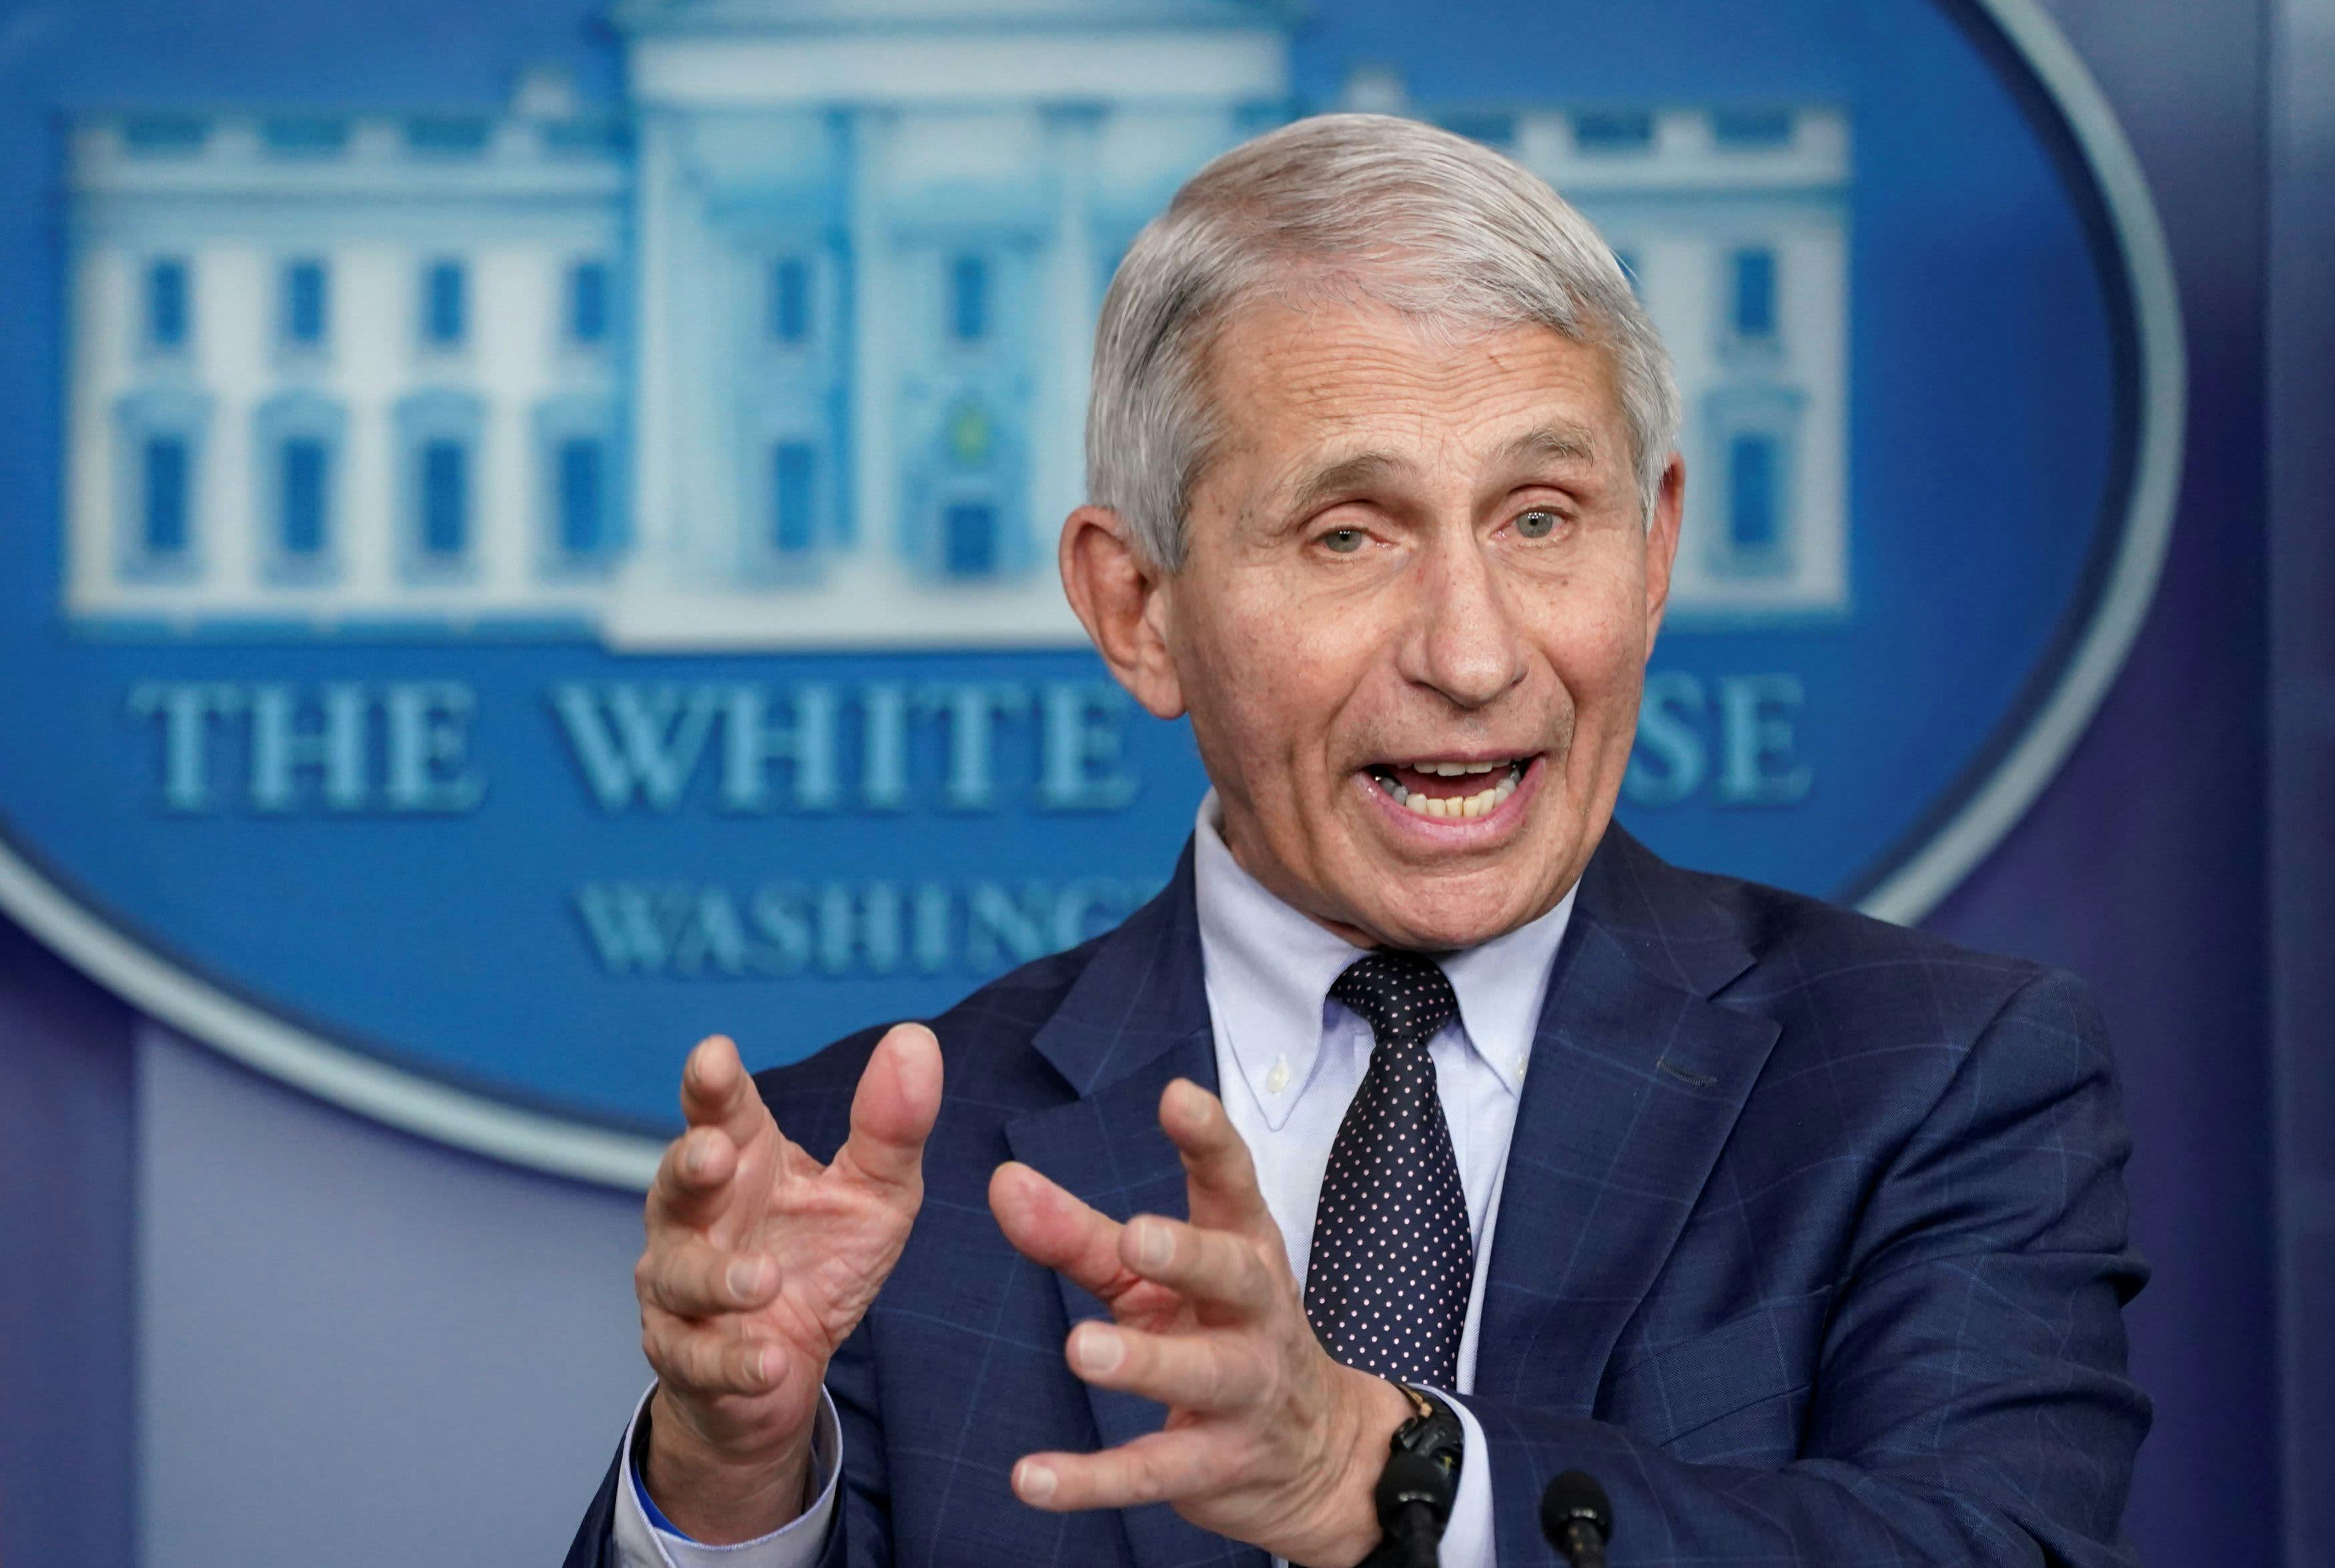 Top 5 Infectious Disease Stories: Fauci’s Retirement and More